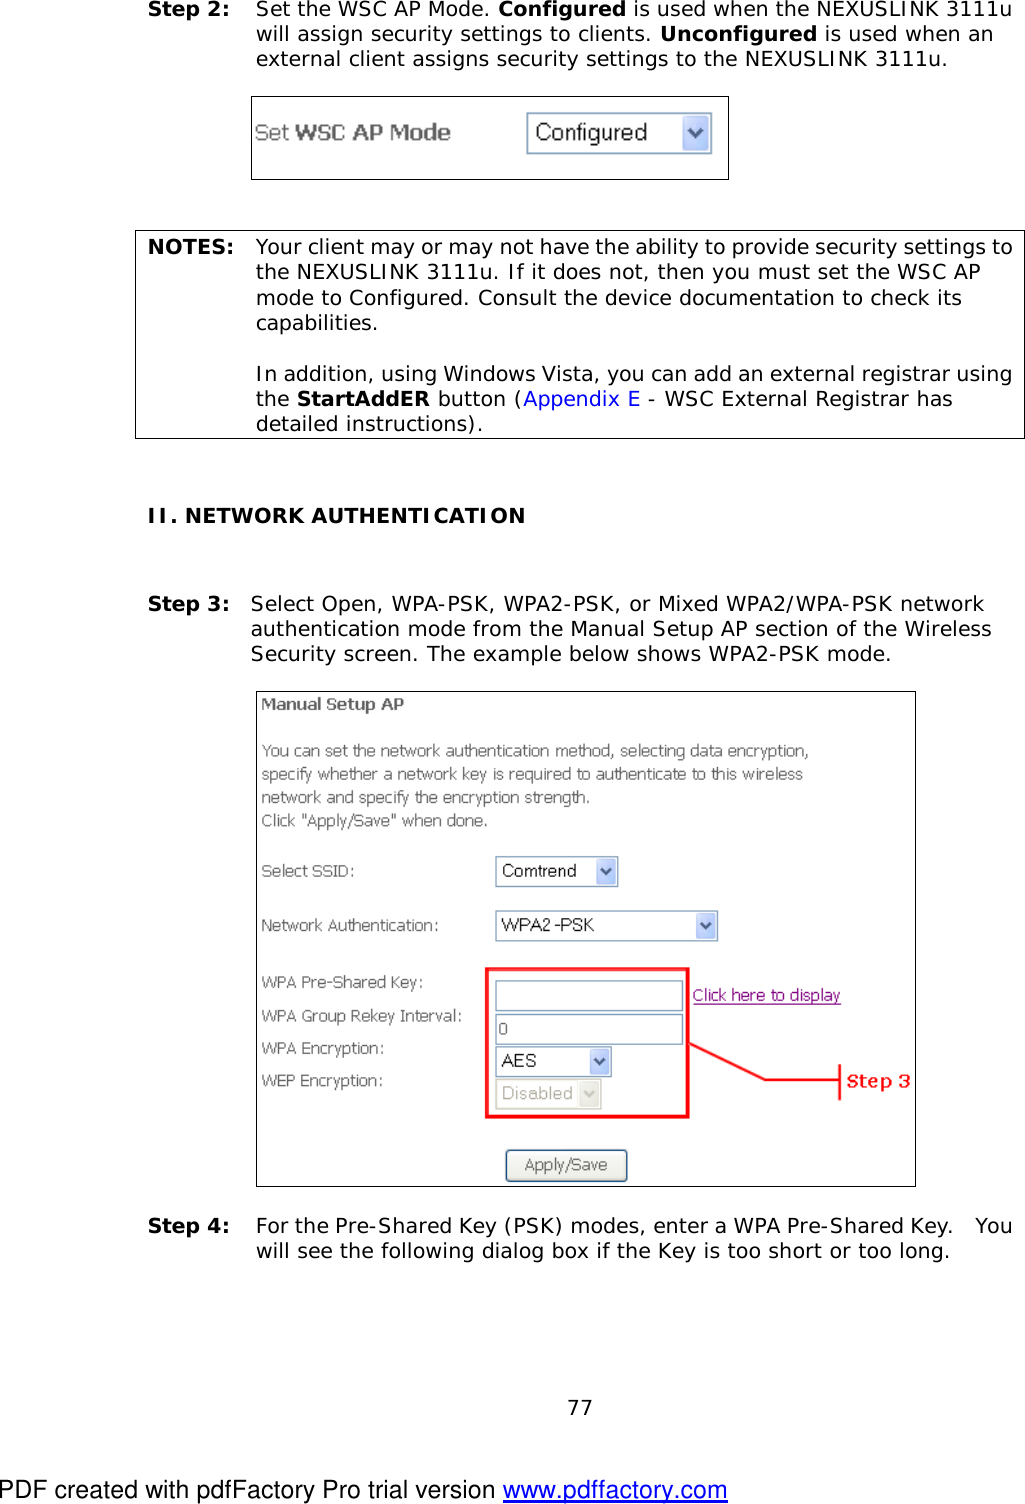  77    Step 2: Set the WSC AP Mode. Configured is used when the NEXUSLINK 3111u will assign security settings to clients. Unconfigured is used when an external client assigns security settings to the NEXUSLINK 3111u.       NOTES:  Your client may or may not have the ability to provide security settings to the NEXUSLINK 3111u. If it does not, then you must set the WSC AP mode to Configured. Consult the device documentation to check its capabilities.   In addition, using Windows Vista, you can add an external registrar using the StartAddER button (Appendix E - WSC External Registrar has detailed instructions).  II. NETWORK AUTHENTICATION  Step 3: Select Open, WPA-PSK, WPA2-PSK, or Mixed WPA2/WPA-PSK network authentication mode from the Manual Setup AP section of the Wireless Security screen. The example below shows WPA2-PSK mode.      Step 4: For the Pre-Shared Key (PSK) modes, enter a WPA Pre-Shared Key.  You will see the following dialog box if the Key is too short or too long.   PDF created with pdfFactory Pro trial version www.pdffactory.com